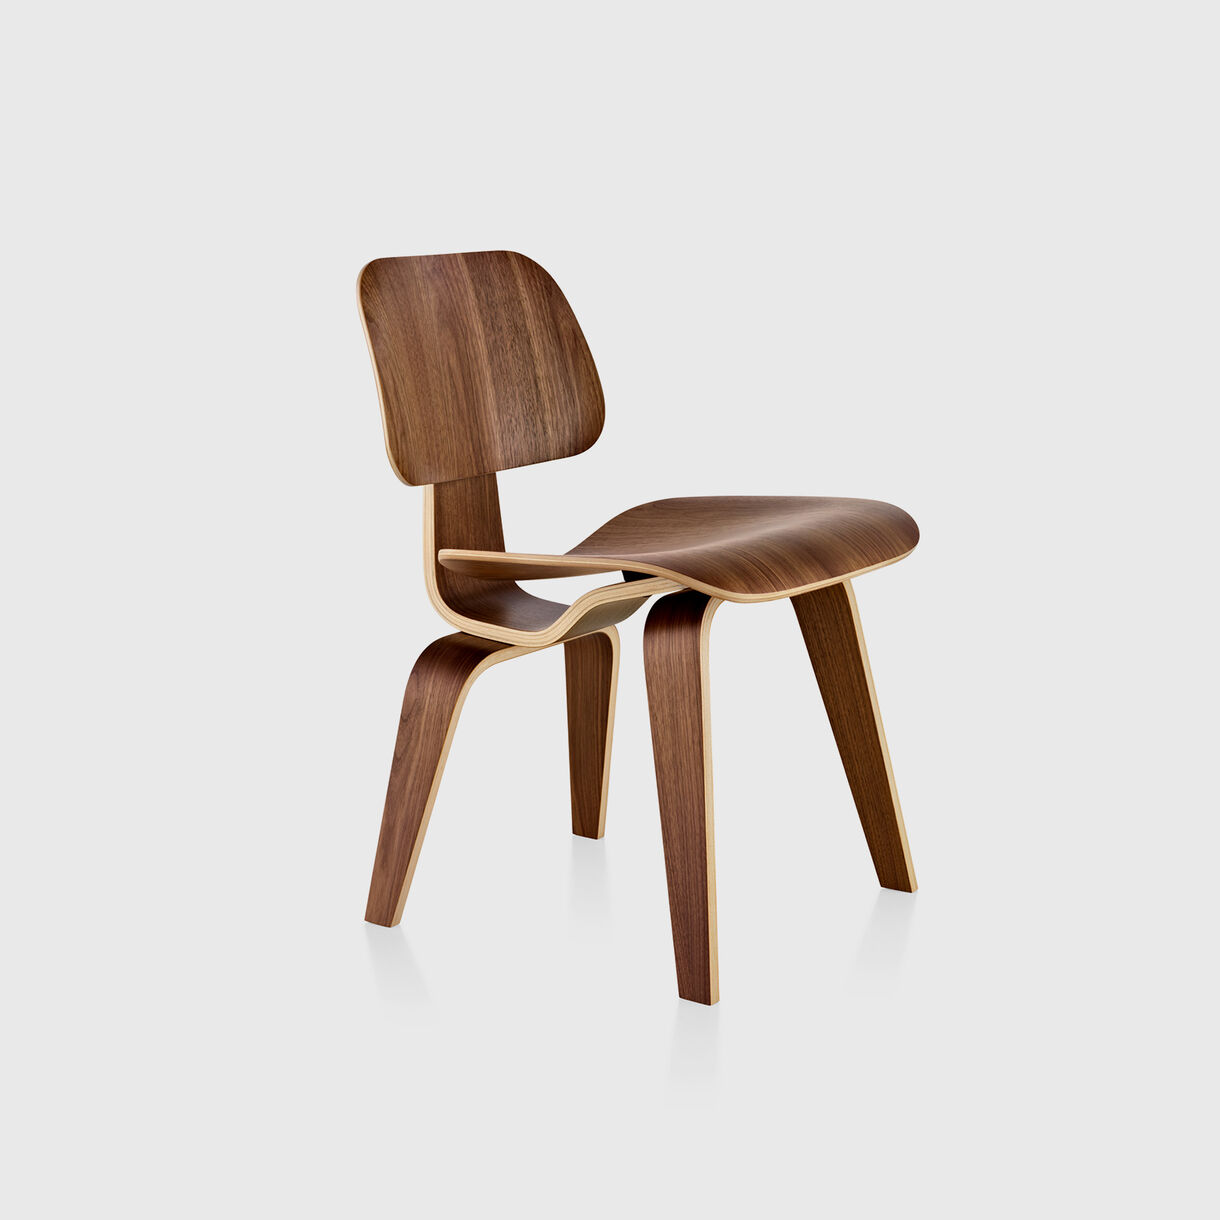 Eames Moulded Plywood Dining Chair, Walnut